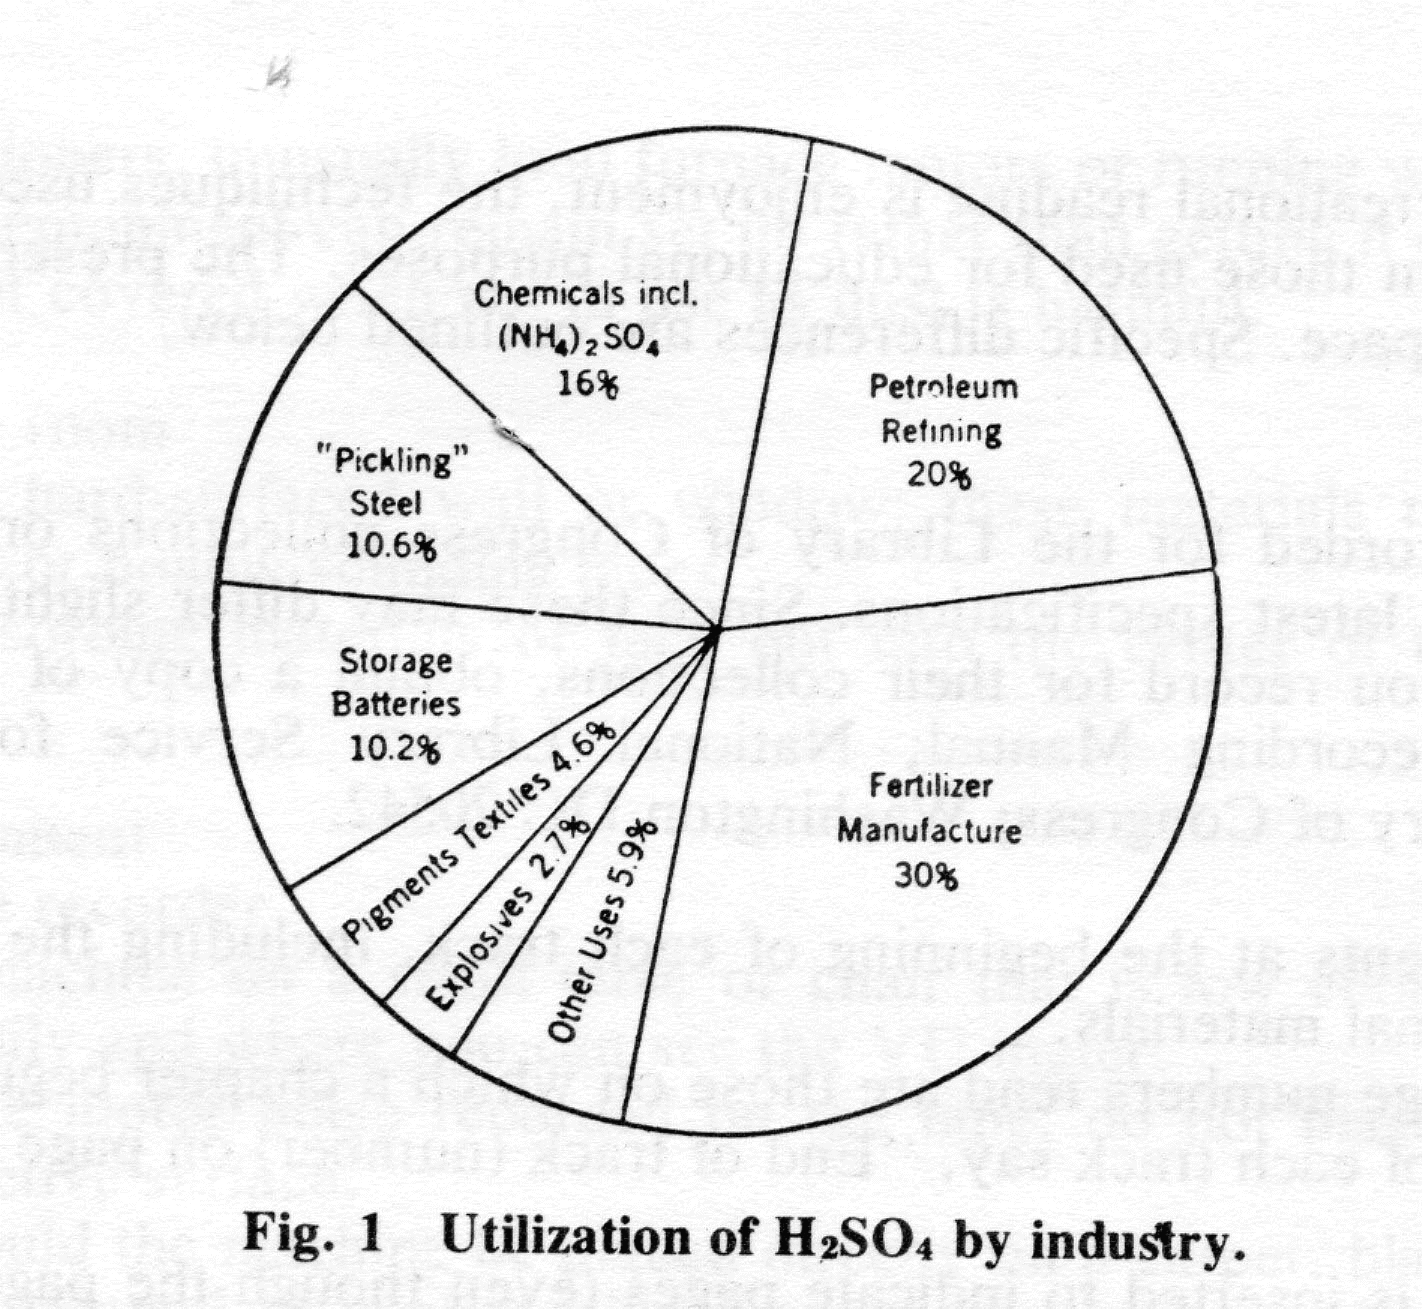 Fig. I Utilization of H2S04 by industry.